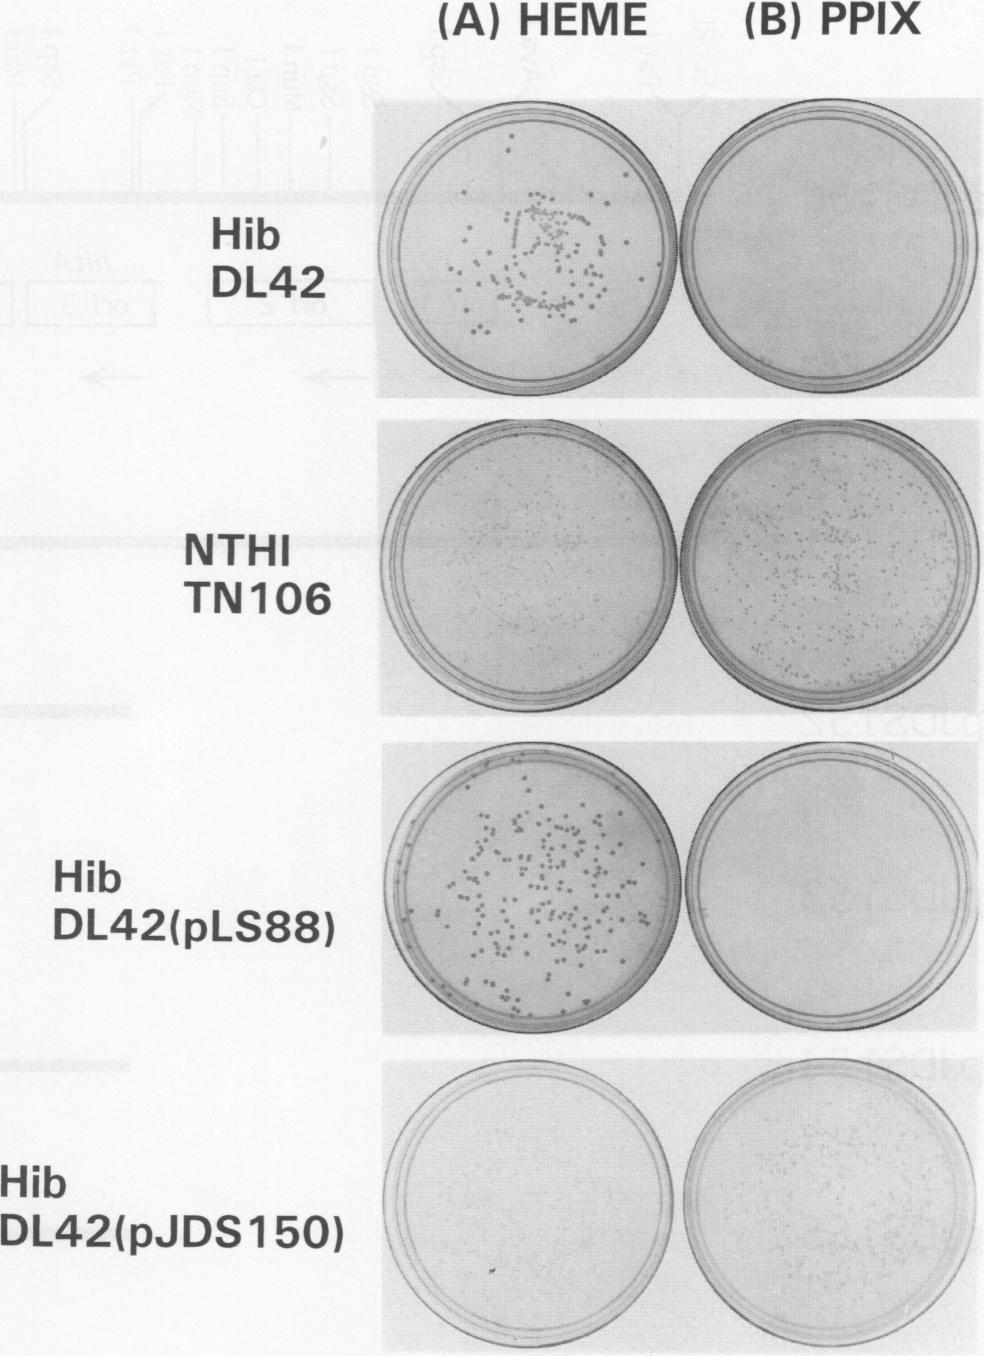 For transformation of NTHI with linear DNA molecules, either the M1v-based method of Herriott (26) or the BHIs agar plate-based method of Sanders et al. (47) was used.